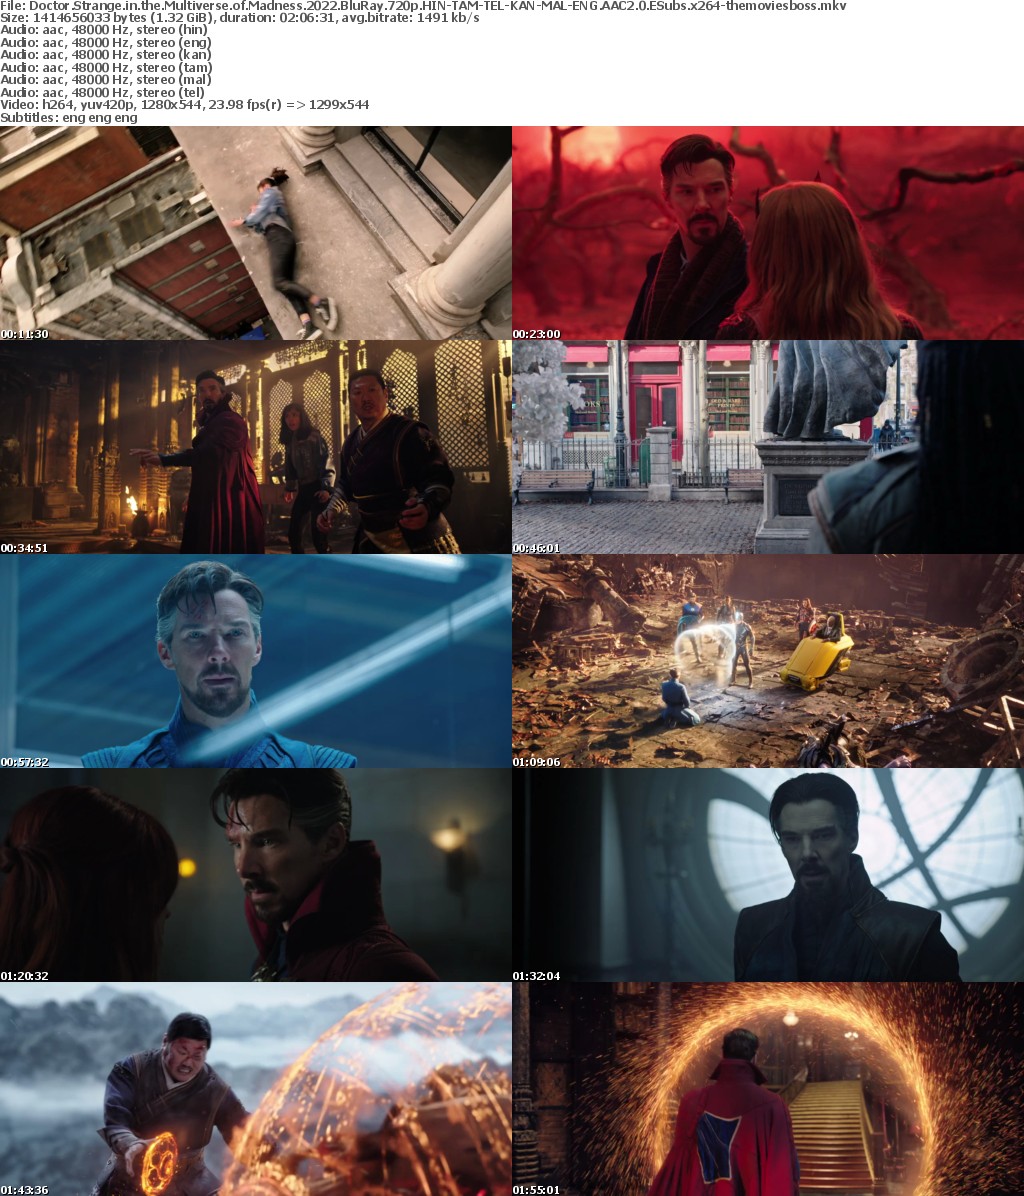 Doctor Strange in the Multiverse of Madness 2022 BluRay 720p HIN-TAM-TEL-KAN-MAL-ENG AAC2 0 ESubs x264-themoviesboss